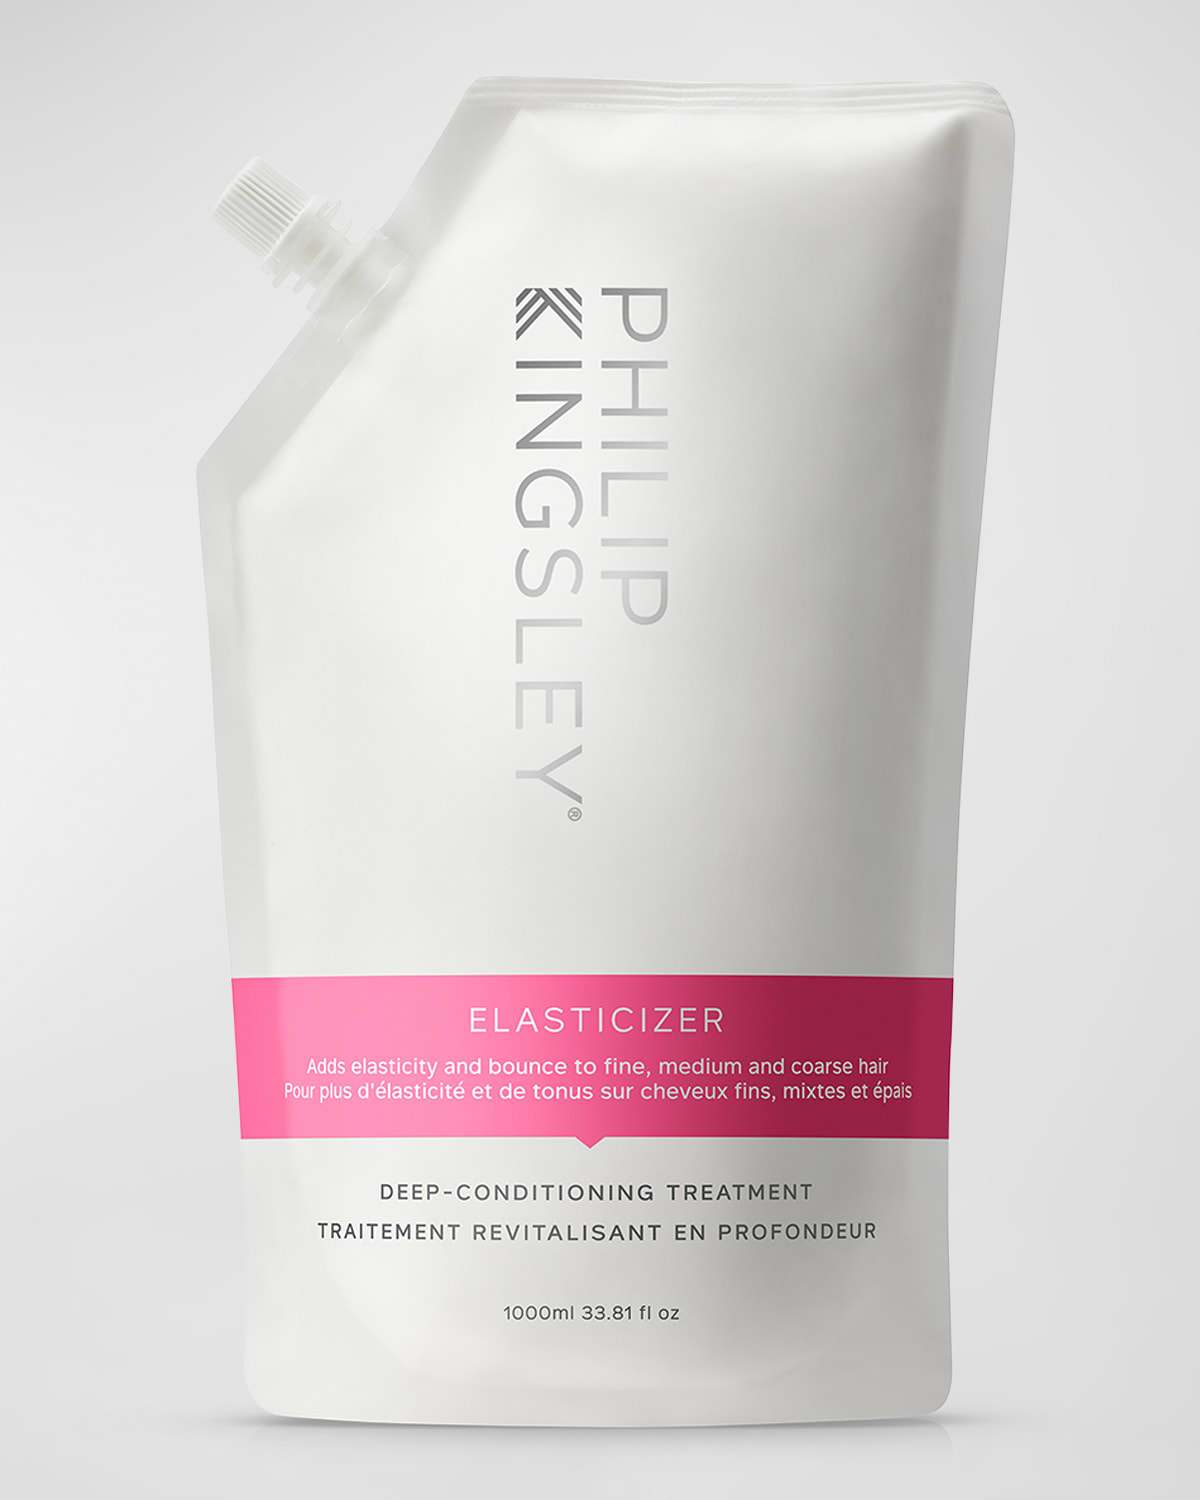 Philip Kingsley Elasticizer Extreme Deep Conditioning Treatment Eco Refill Pouch, 33.8 Oz.